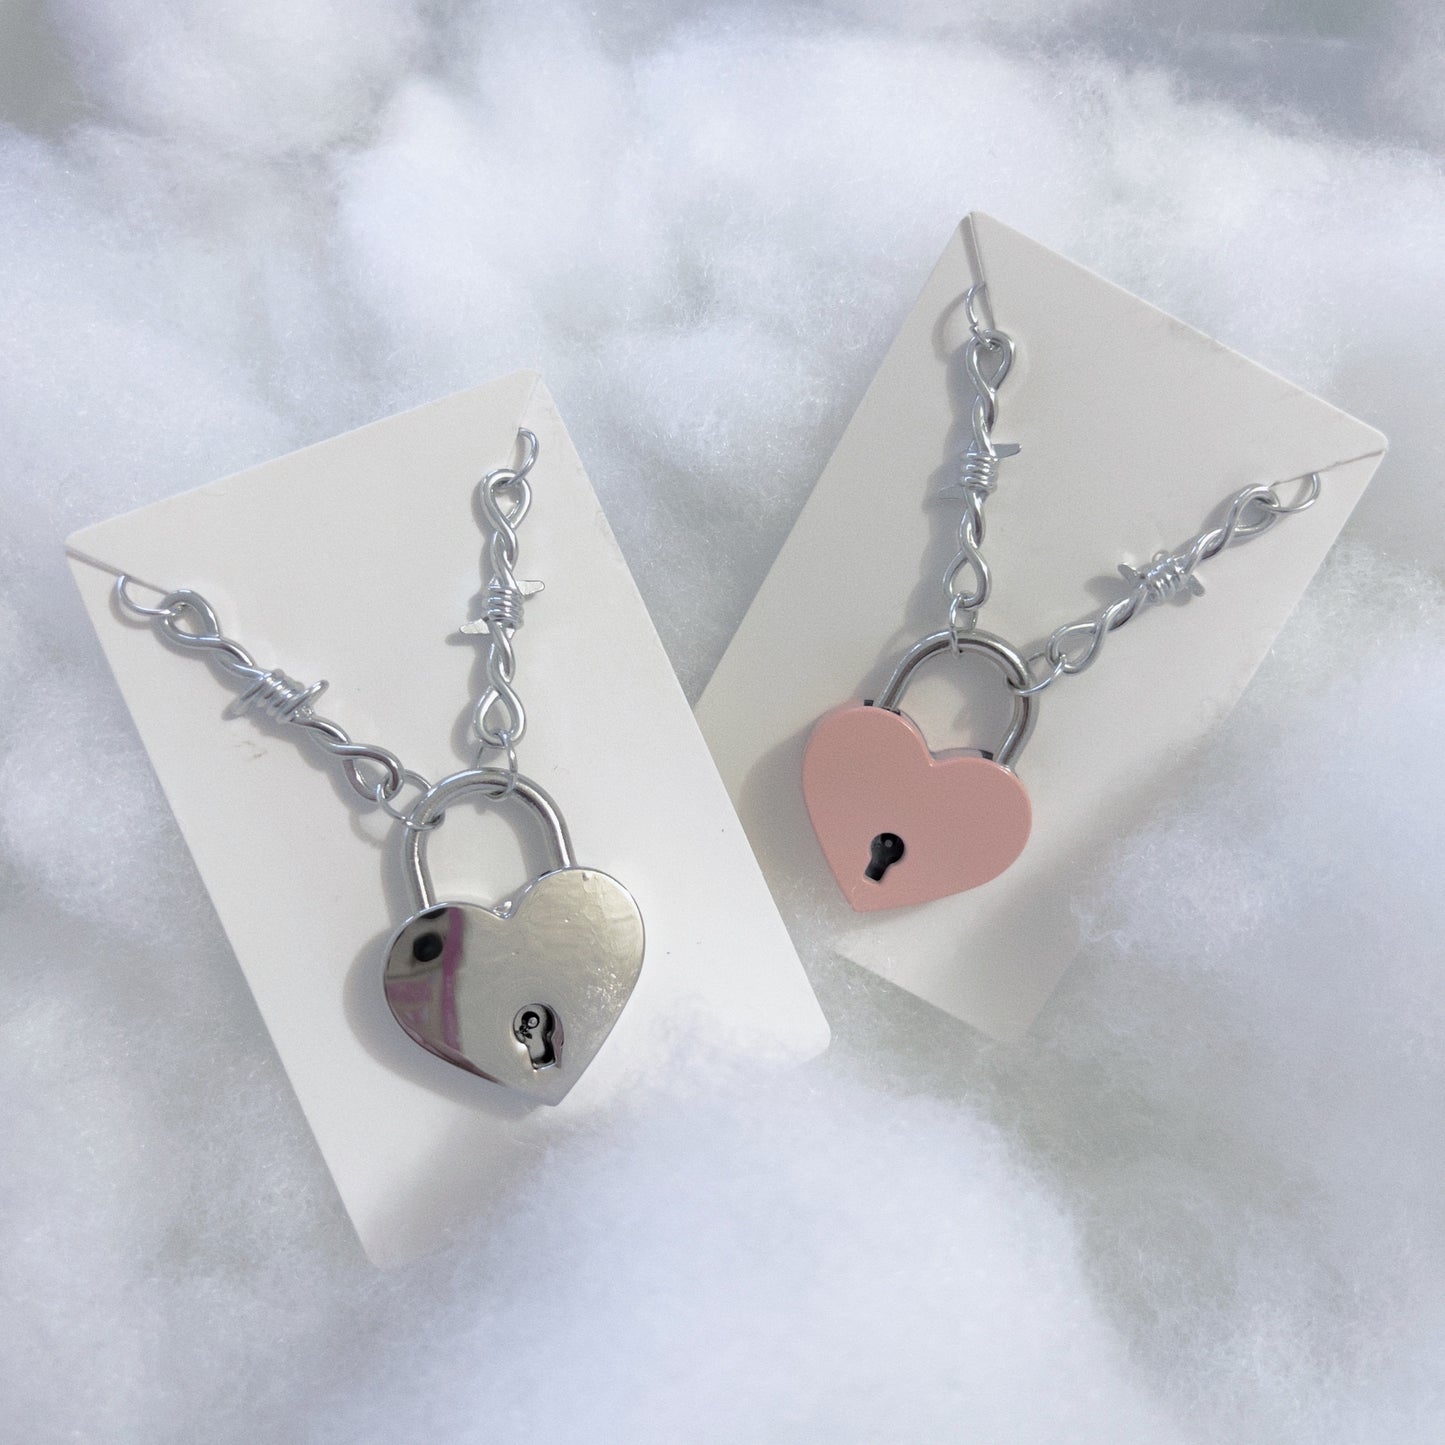 Silver Heart Locket Necklace with barbed necklace chain necklace displayed on the left, pink heart locket with barbed necklace chain necklace on the right.